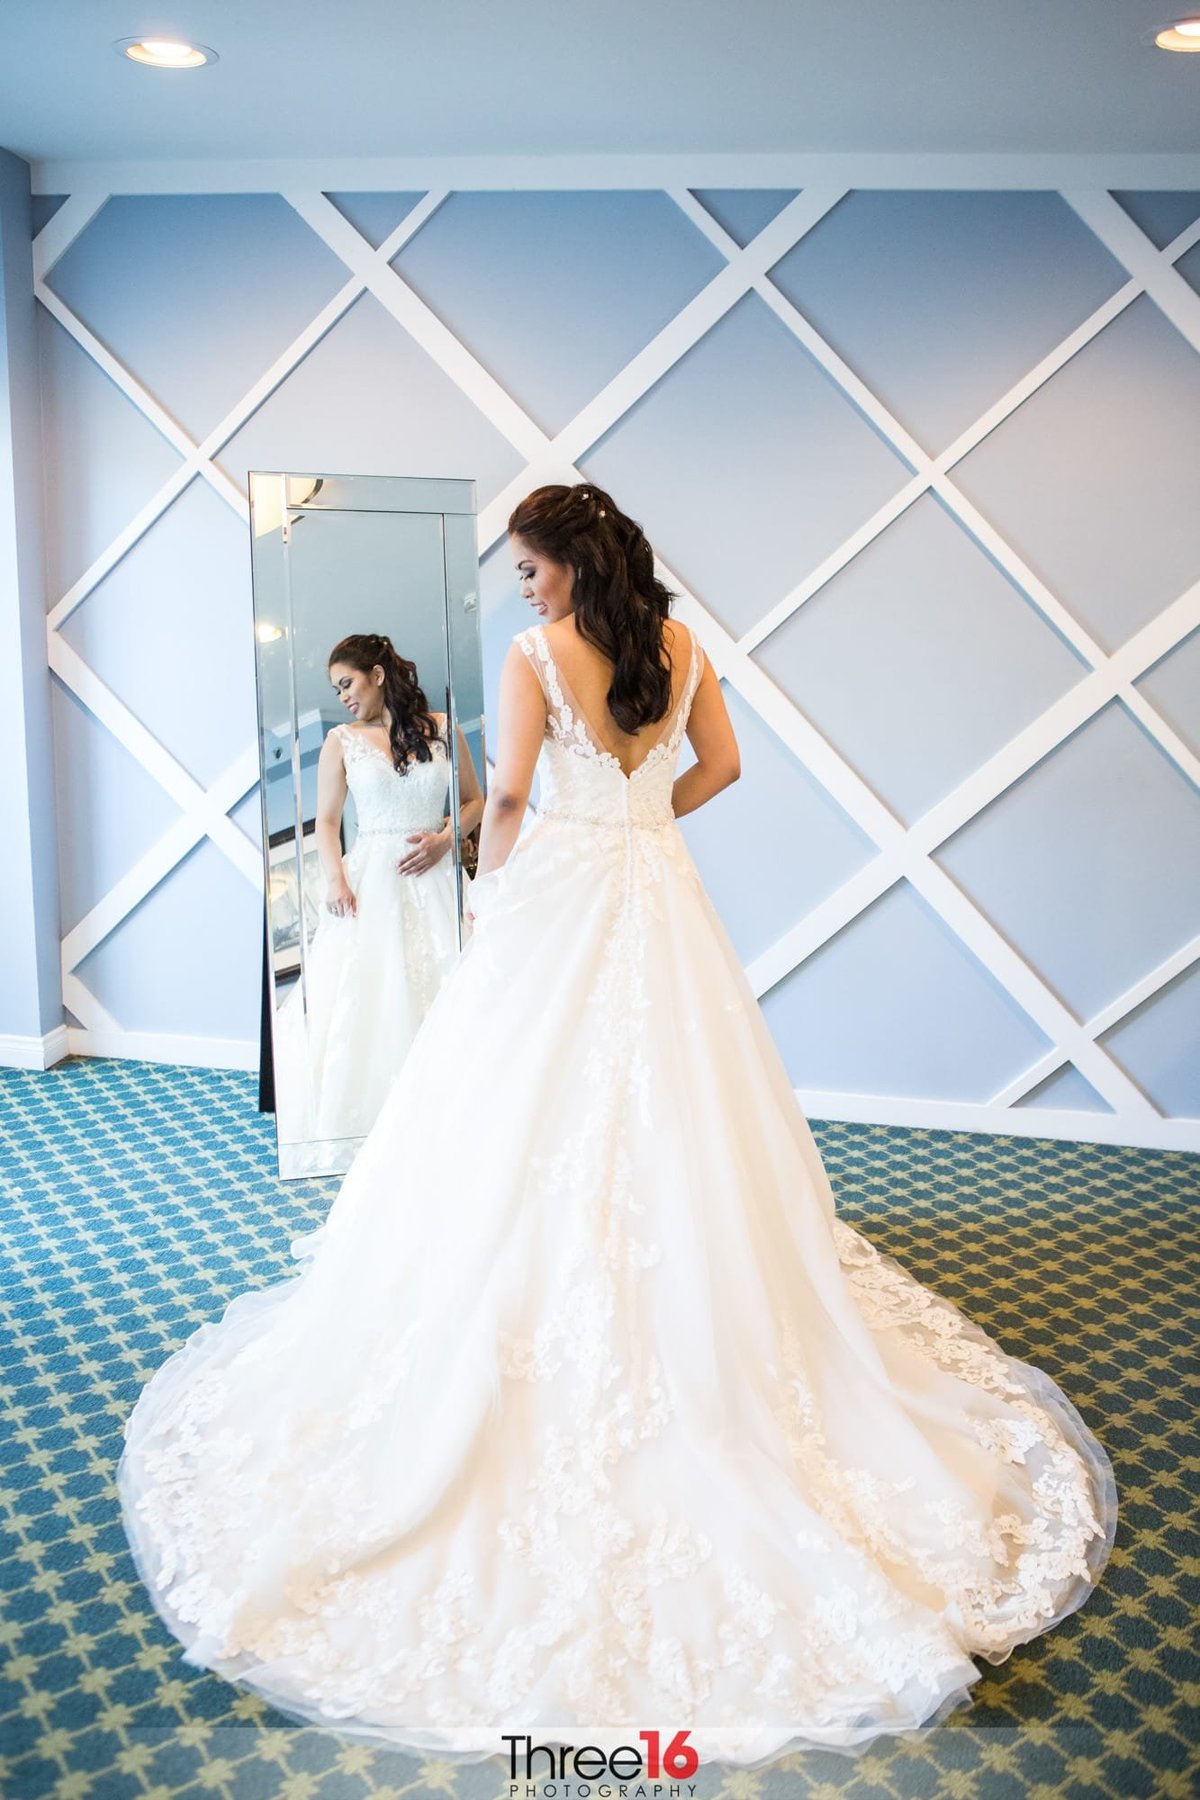 Bride posing in front of mirror with her gown train in full bloom